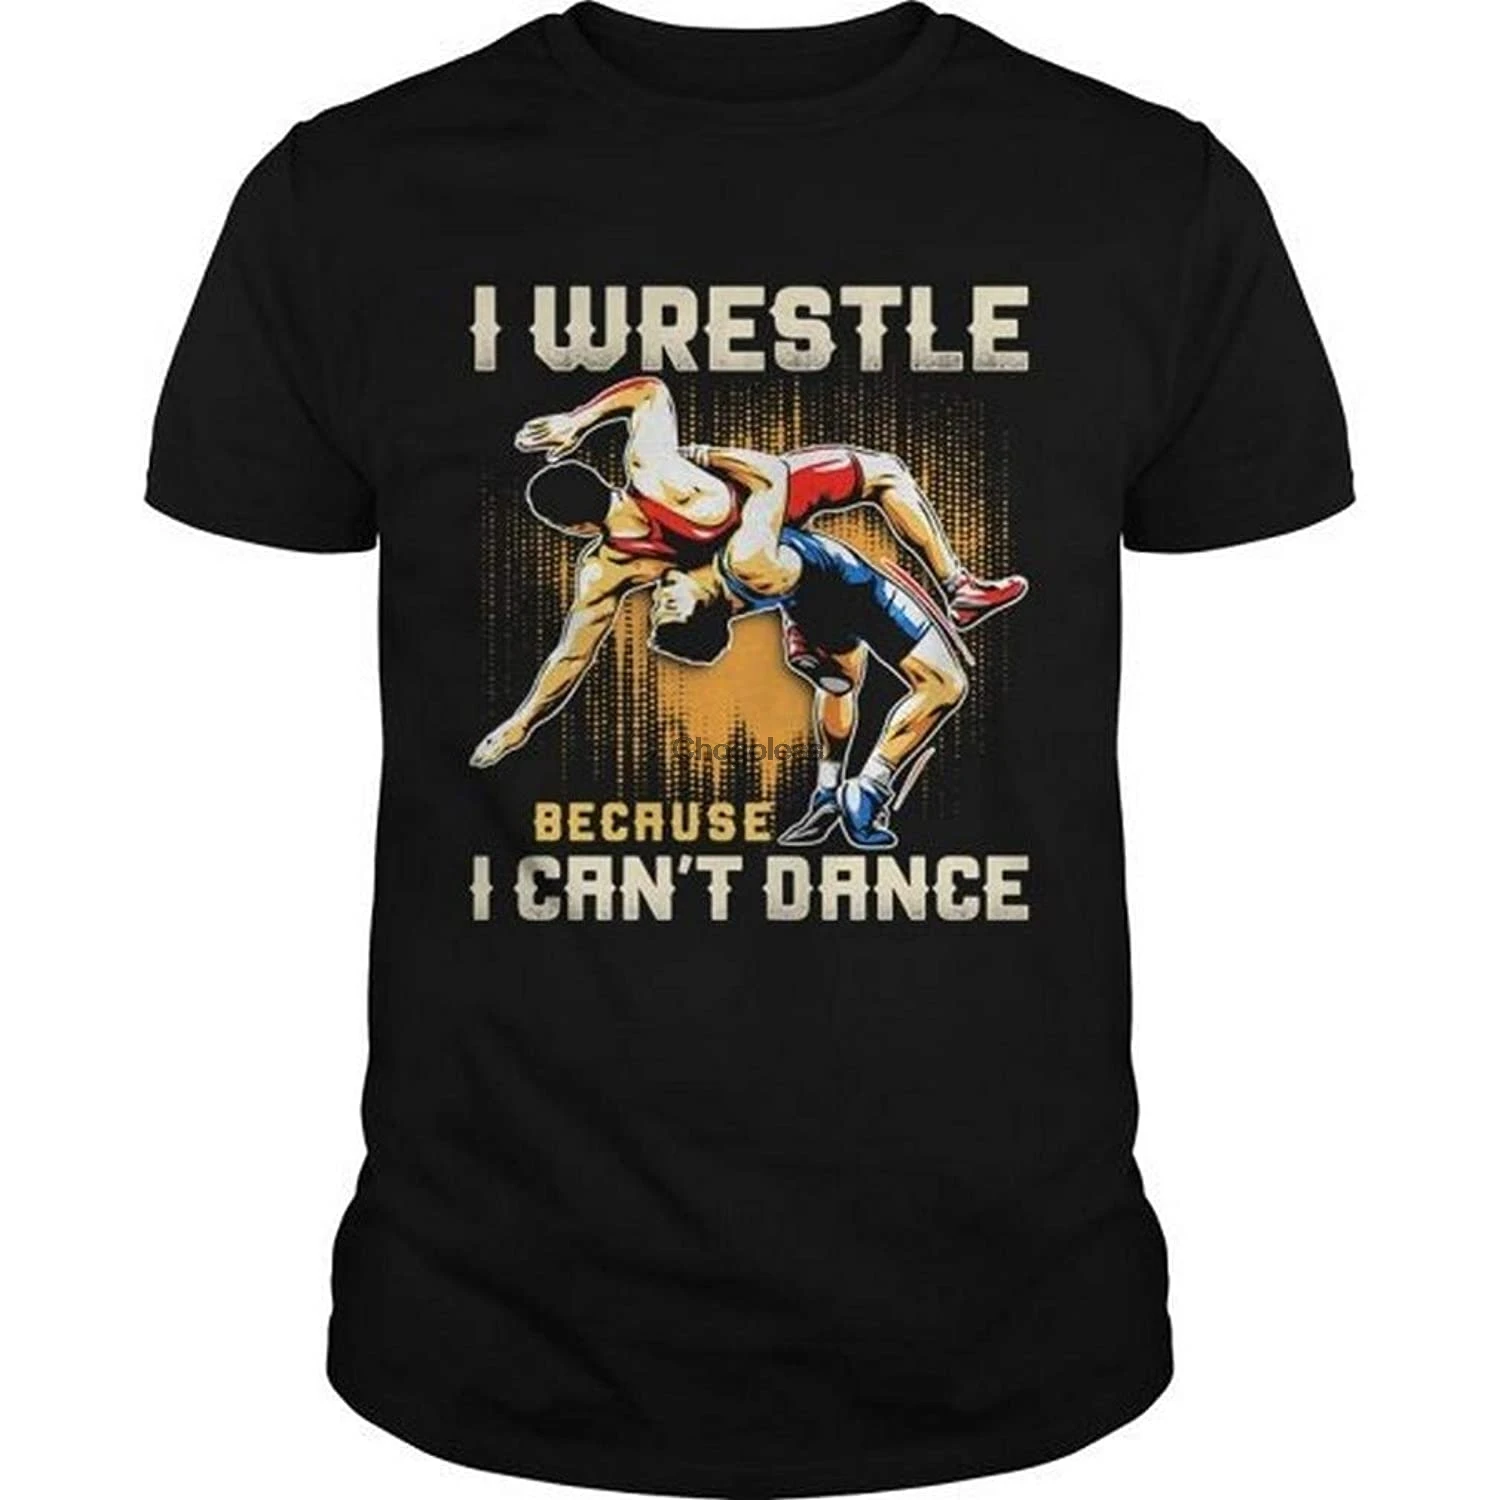 

I Wrestle Because I Cant Dance Shirt Short Sleeve Graphic Tee Women Men Cute Popular Woman's Heather Graphic TShir